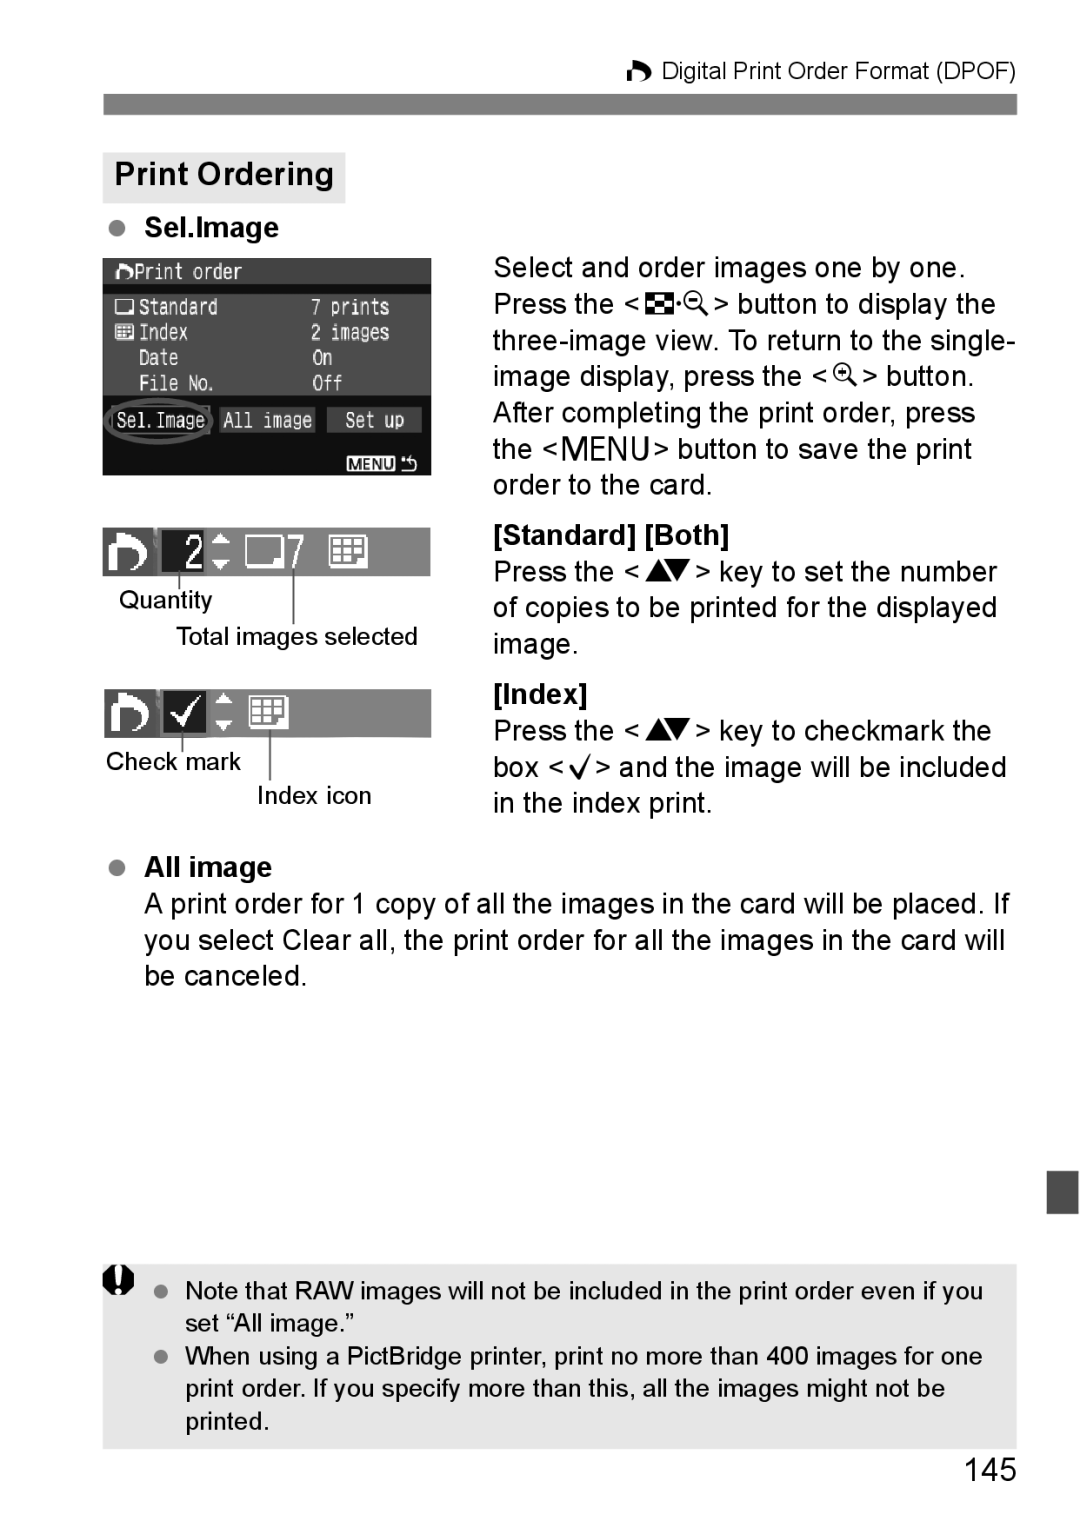 Canon EOS 450D instruction manual Print Ordering, 145 